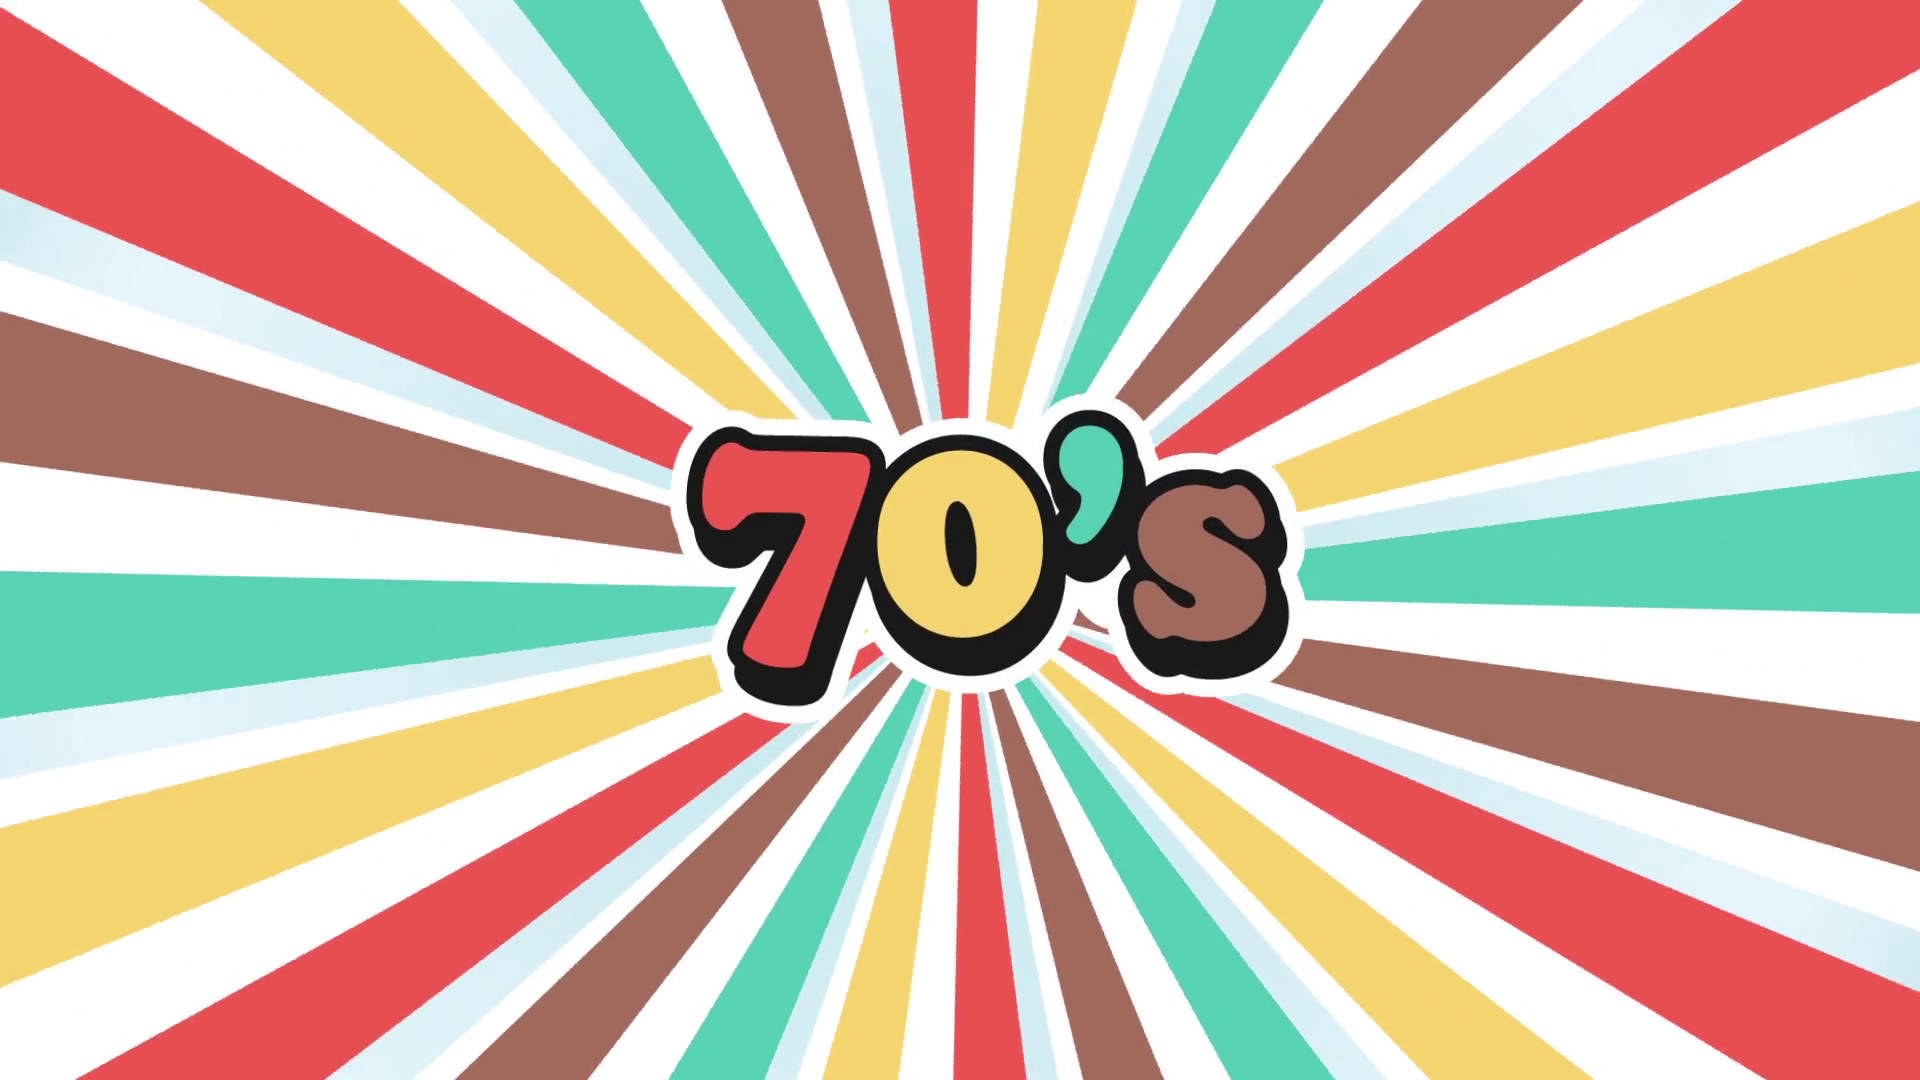 Colorful Vintage 70s With Rays Wallpaper